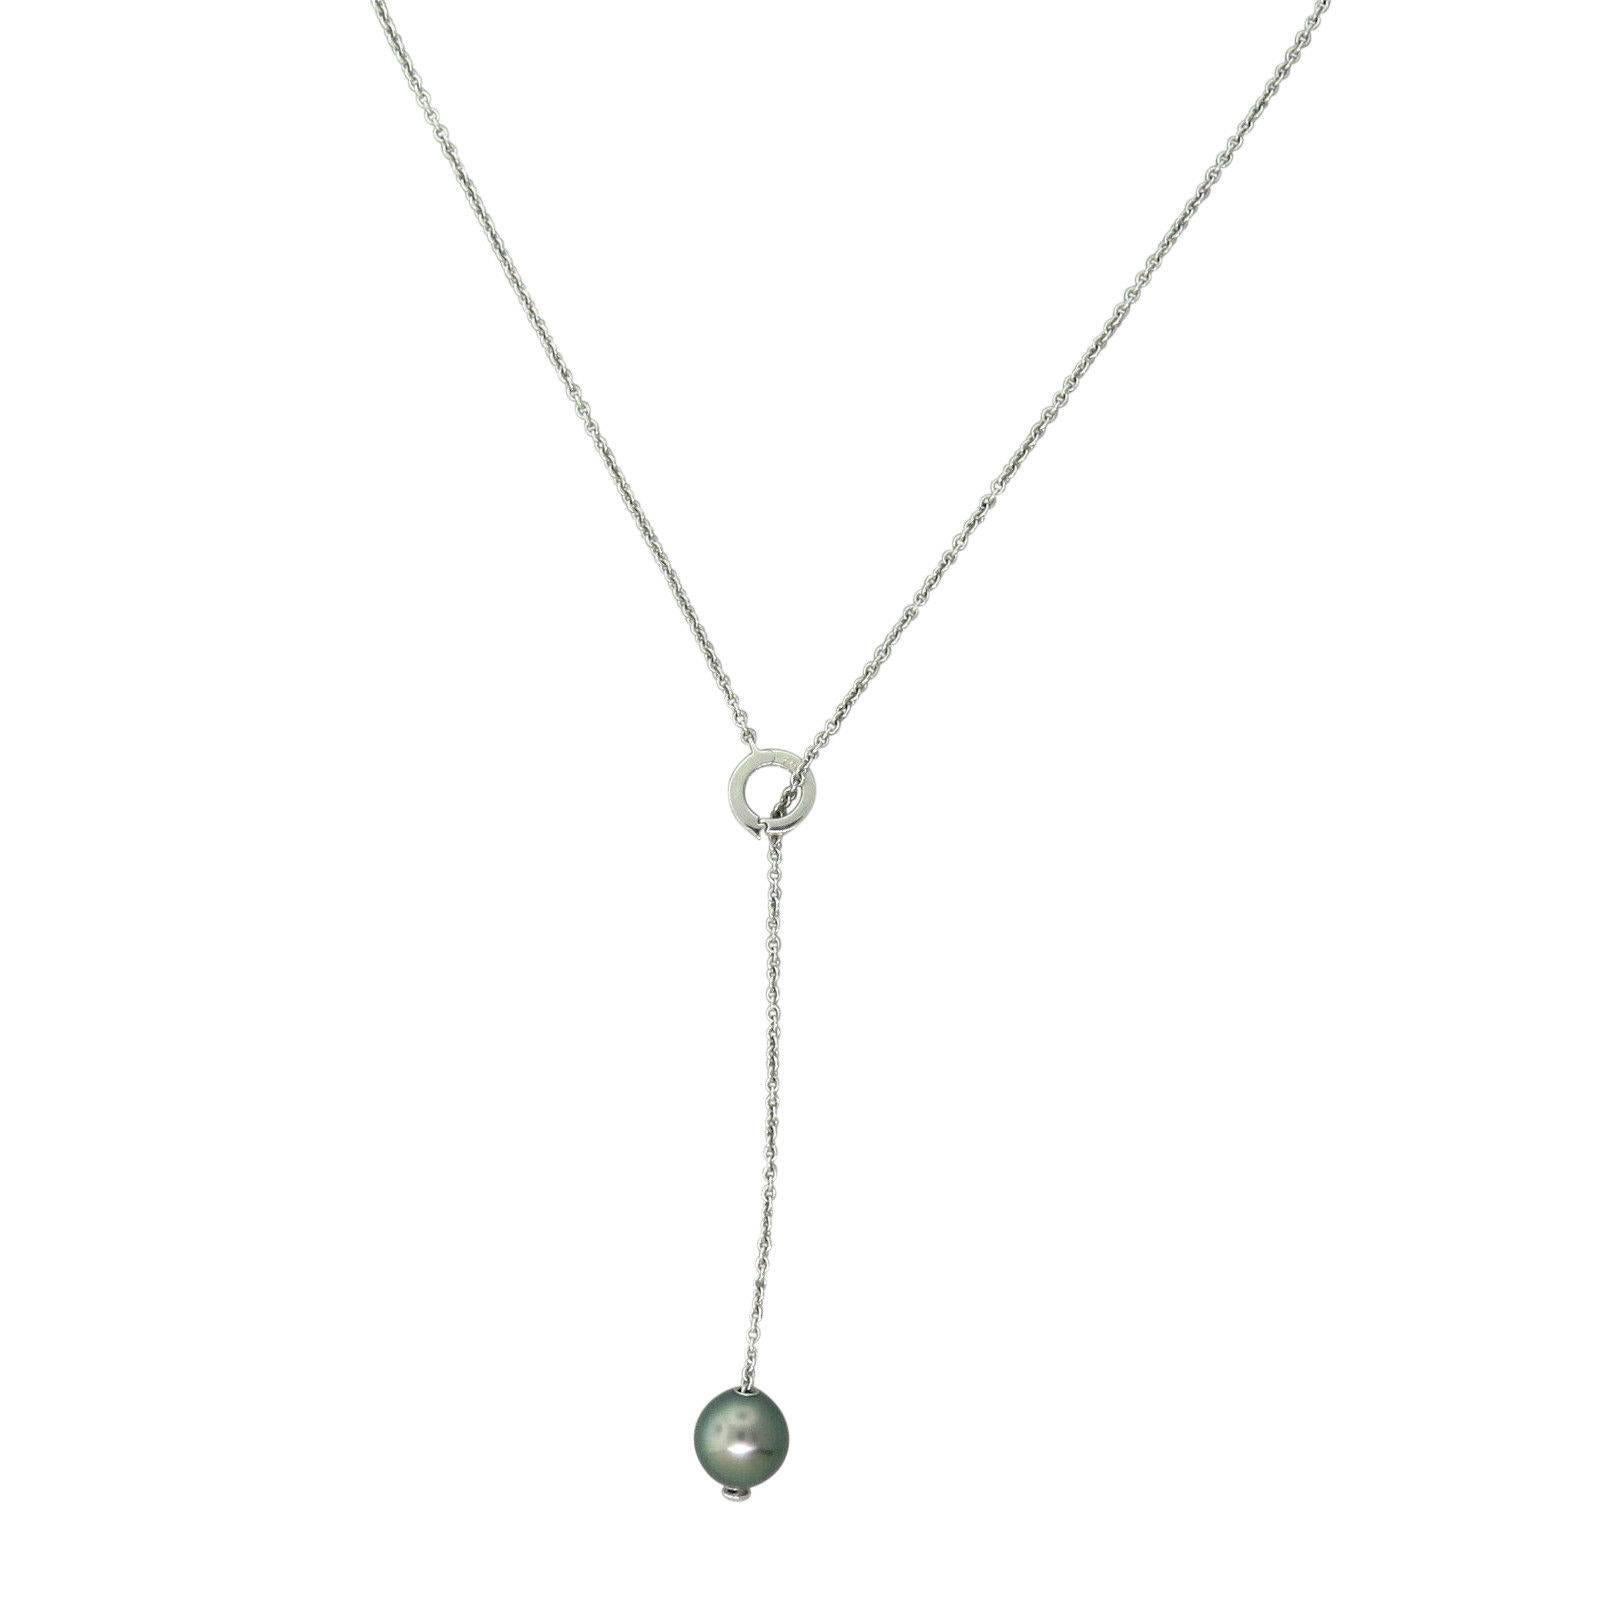 Mikimoto drop necklace with adjustable length,featuring one 10.7mm pearl and diamond clasp from the Pearls In Motion collection. Necklace length is adjustable to 18